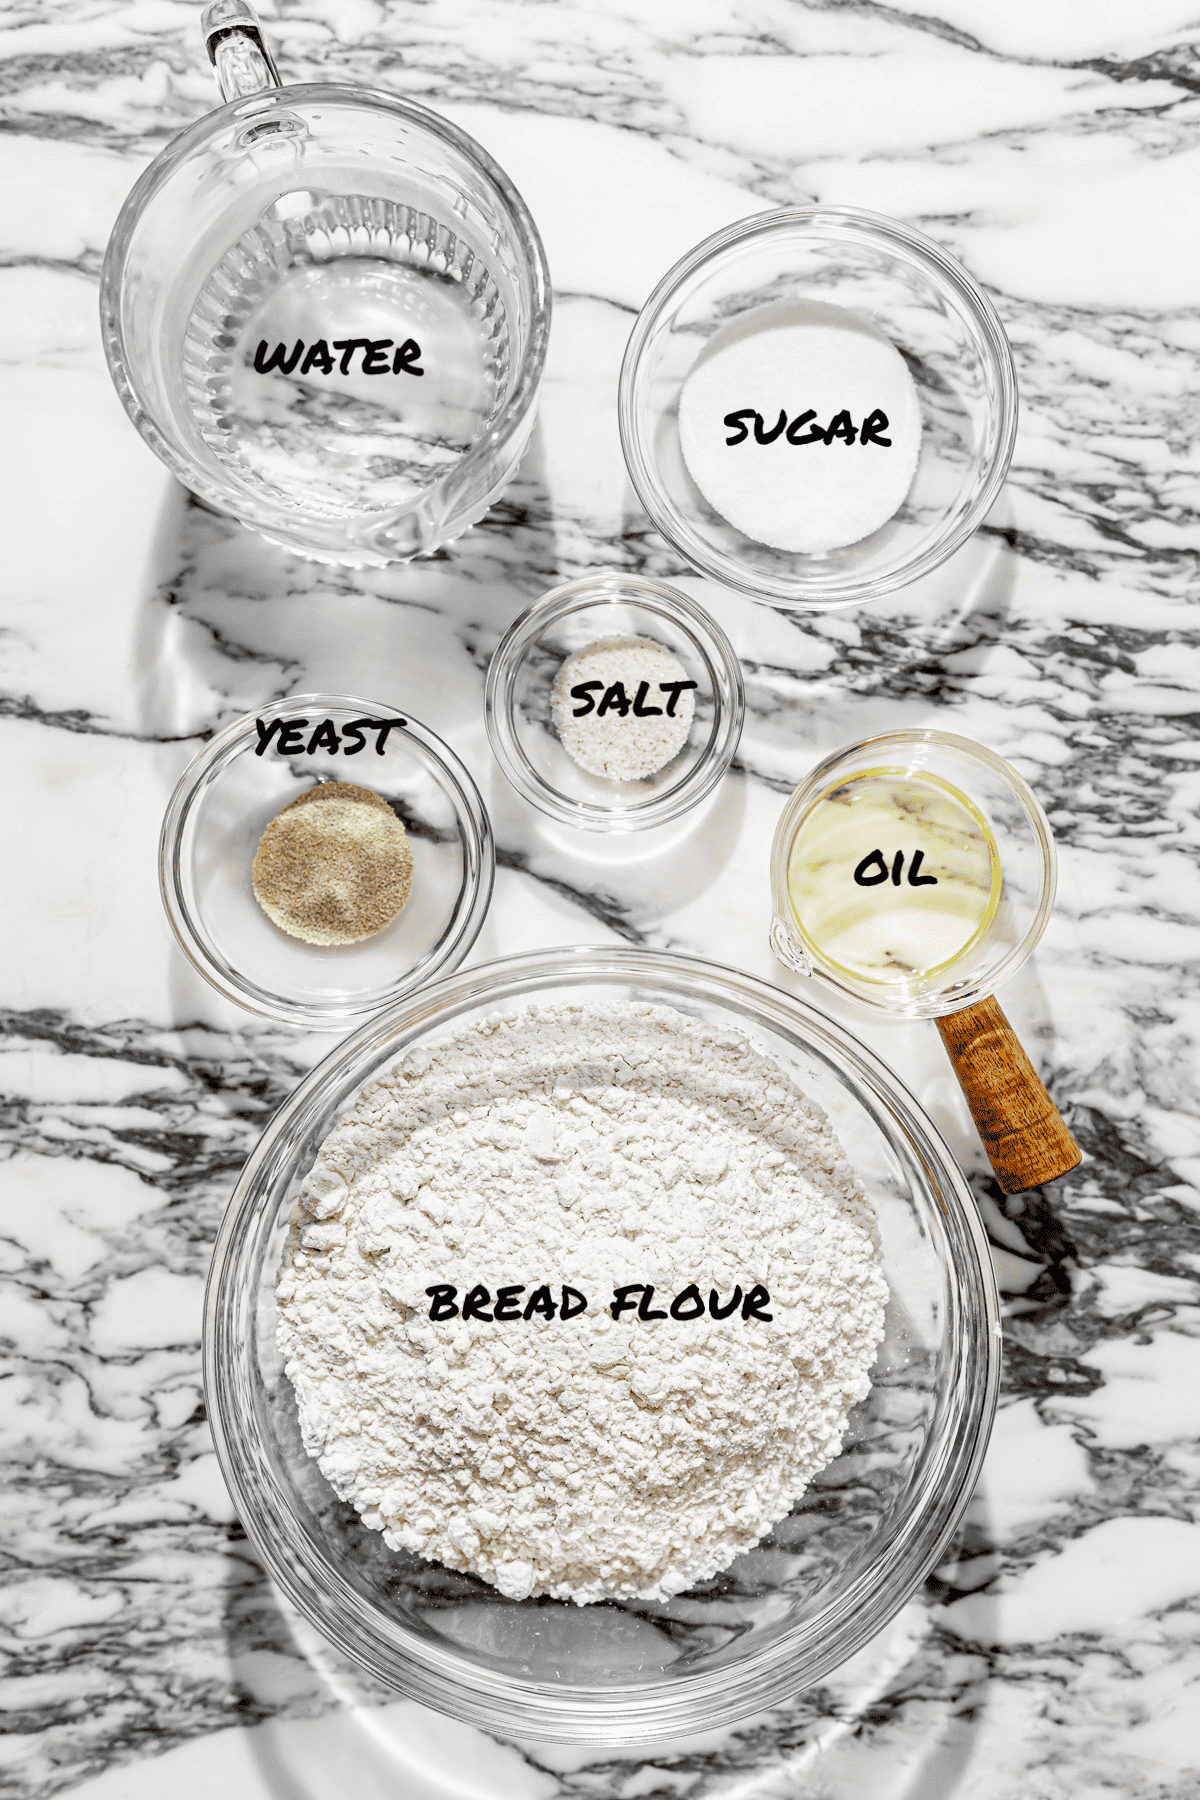 overnight pizza dough ingredients. 